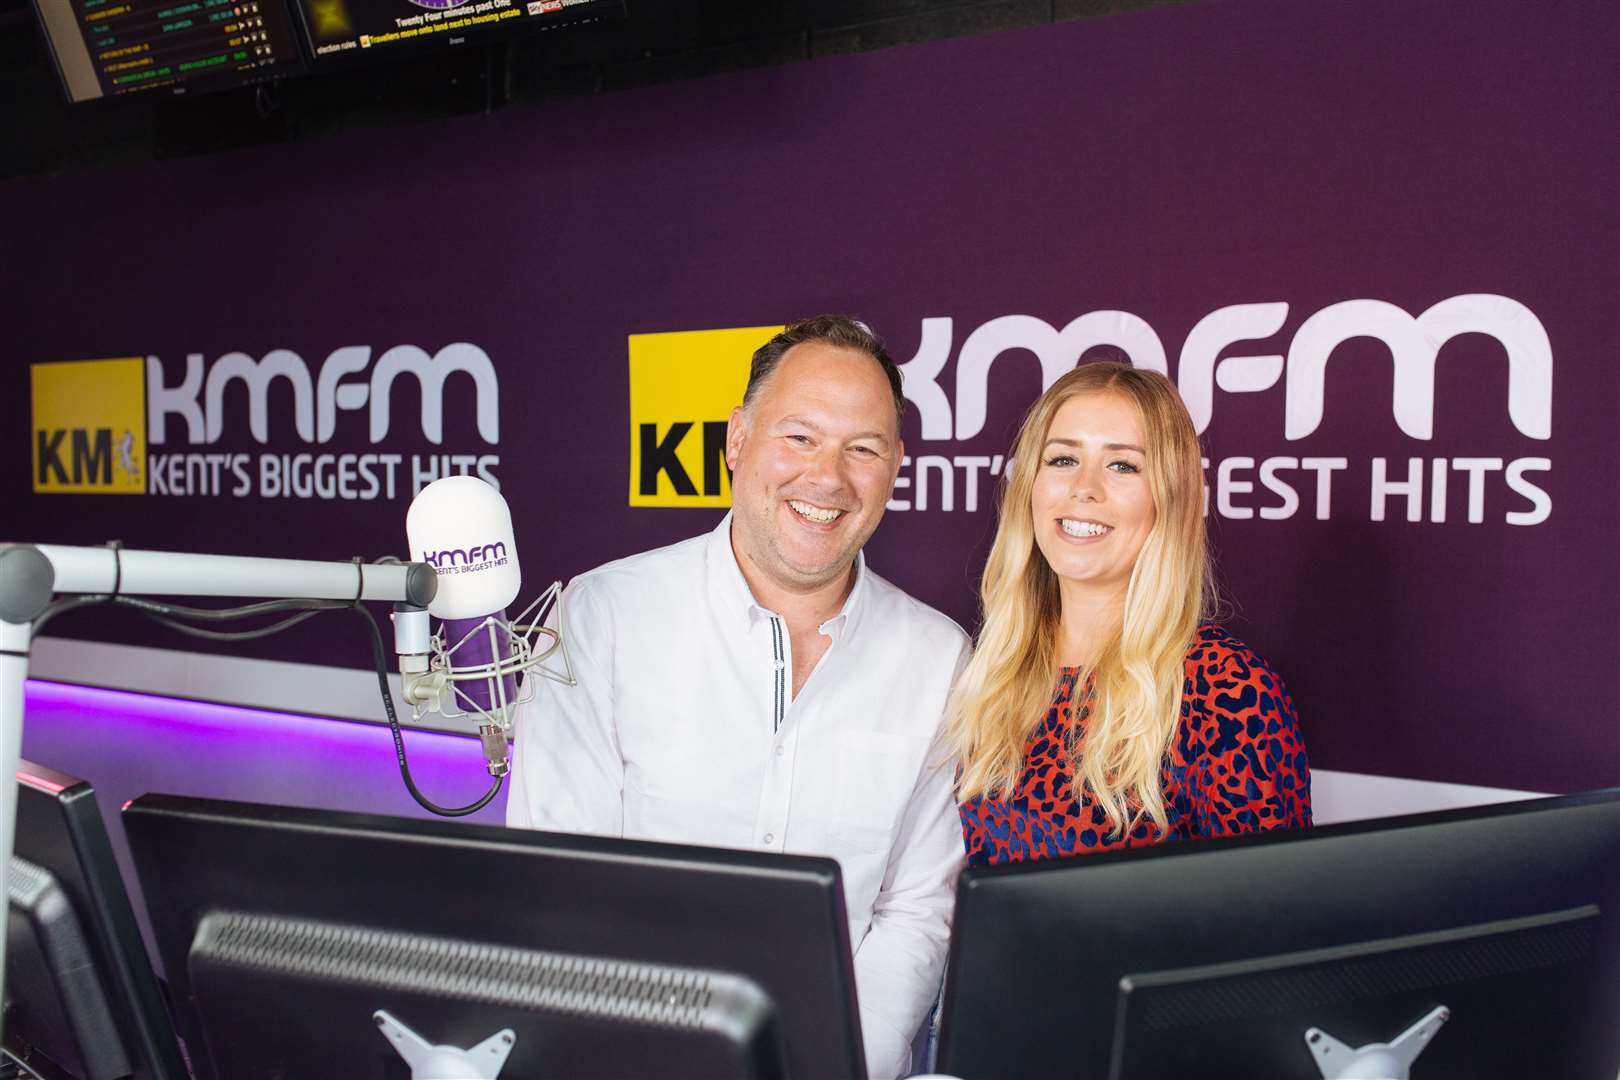 kmfm has been named Kent Media Innovation of the Year